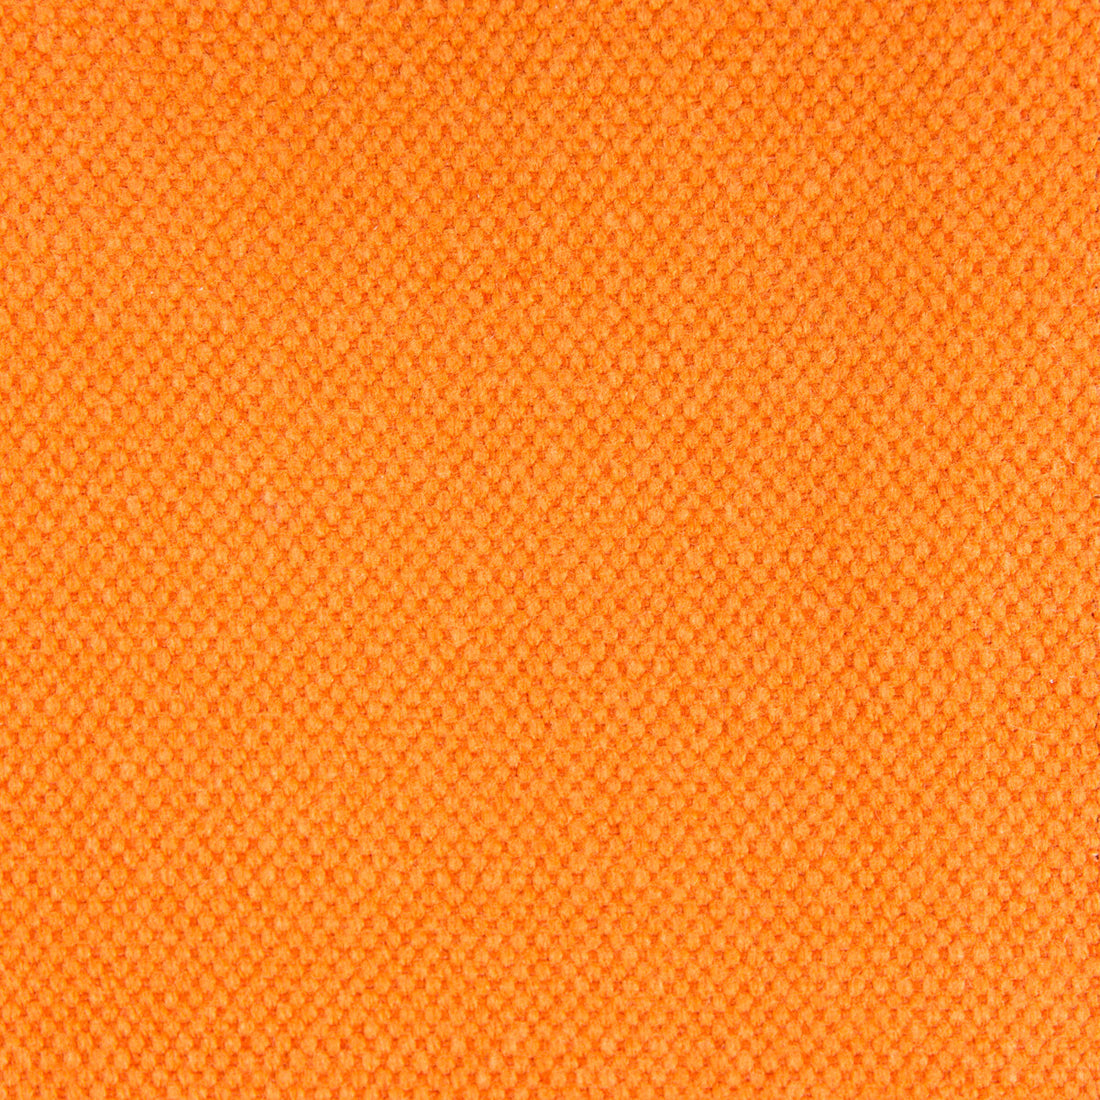 Lima fabric in naranja color - pattern GDT5616.013.0 - by Gaston y Daniela in the Gaston Nuevo Mundo collection